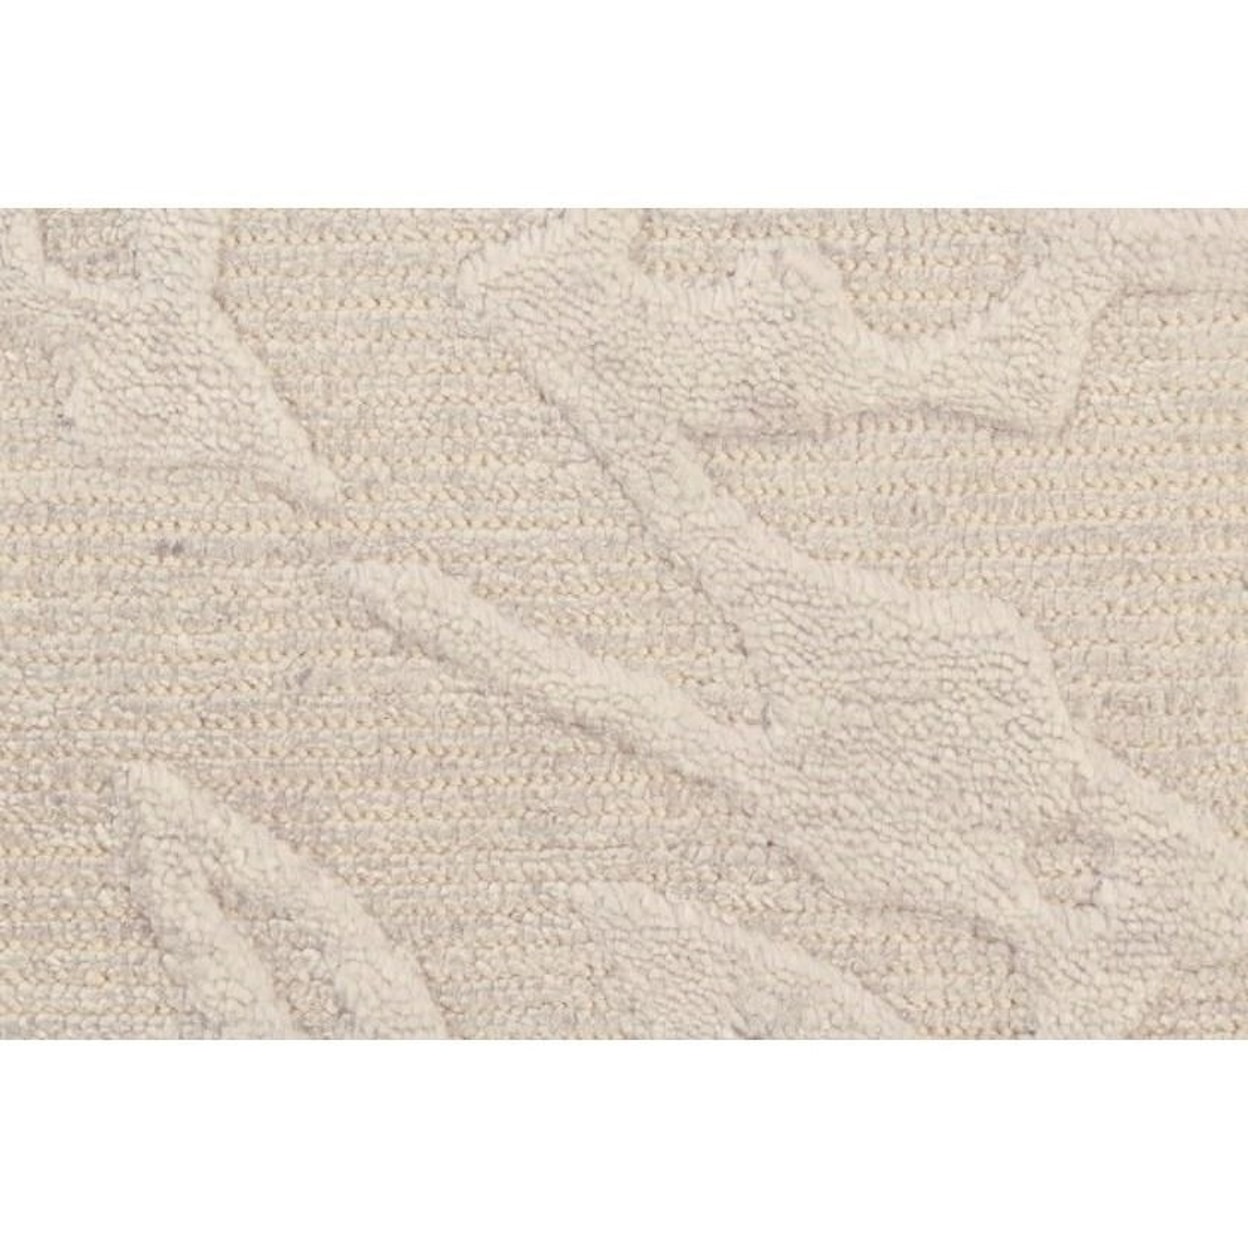 Feizy Rugs Leilani Cashmere 7'-9" x 9'-9" Area Rug